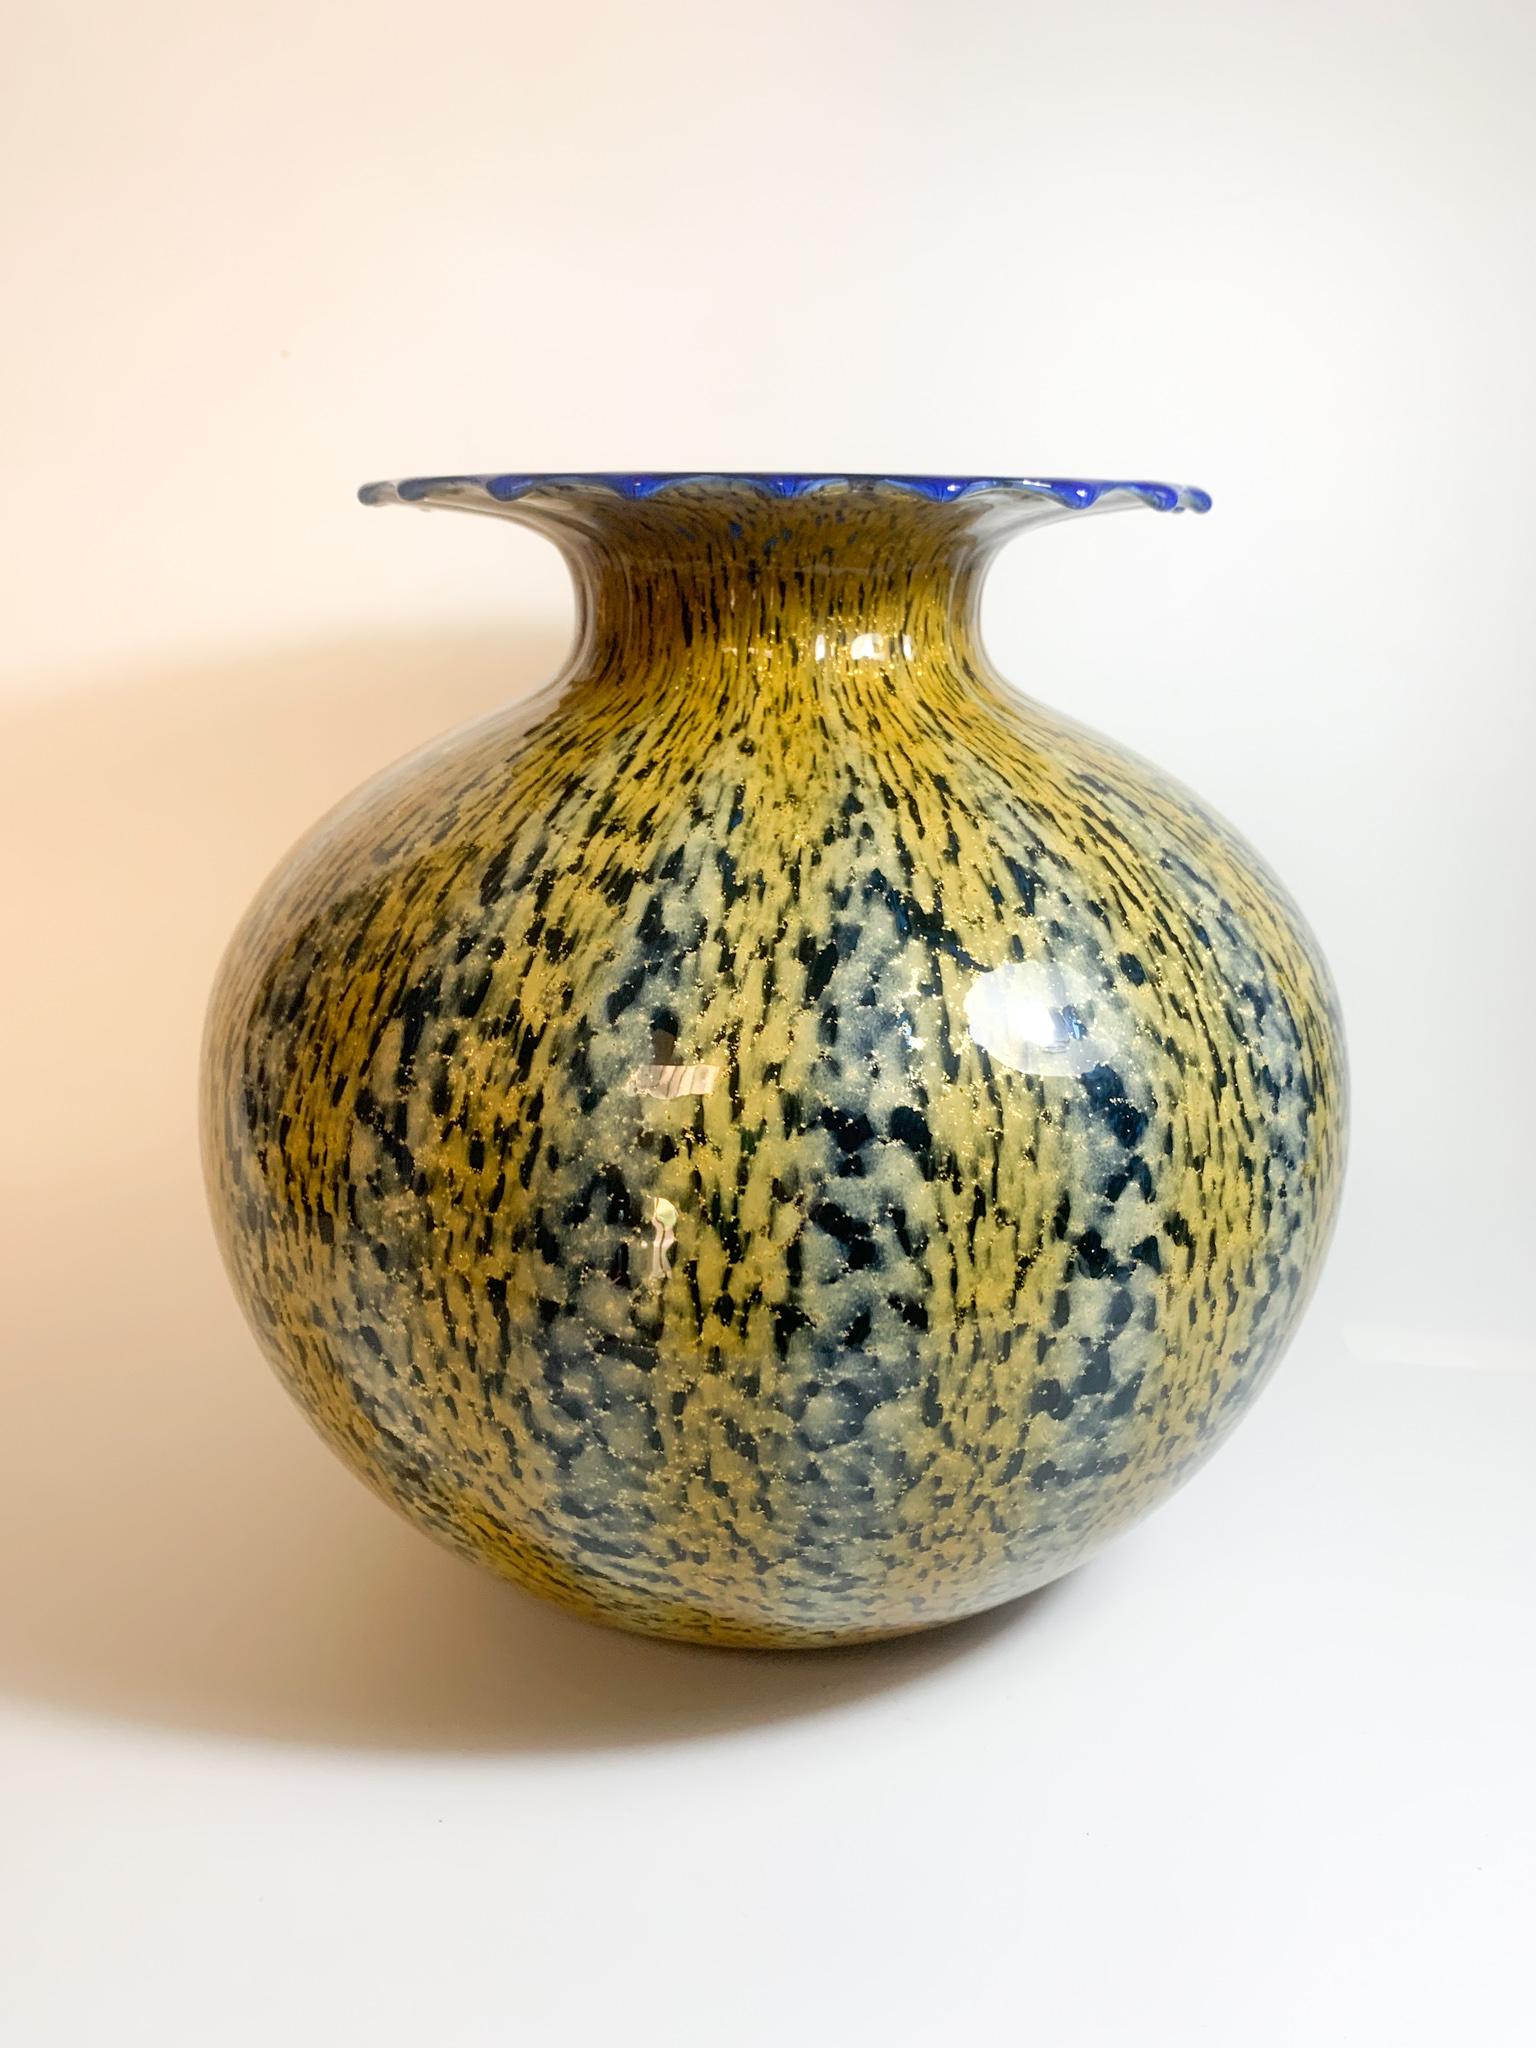 Vase in yellow and blue Murano glass, made in the 1980s

diameter cm 23 h cm 23.